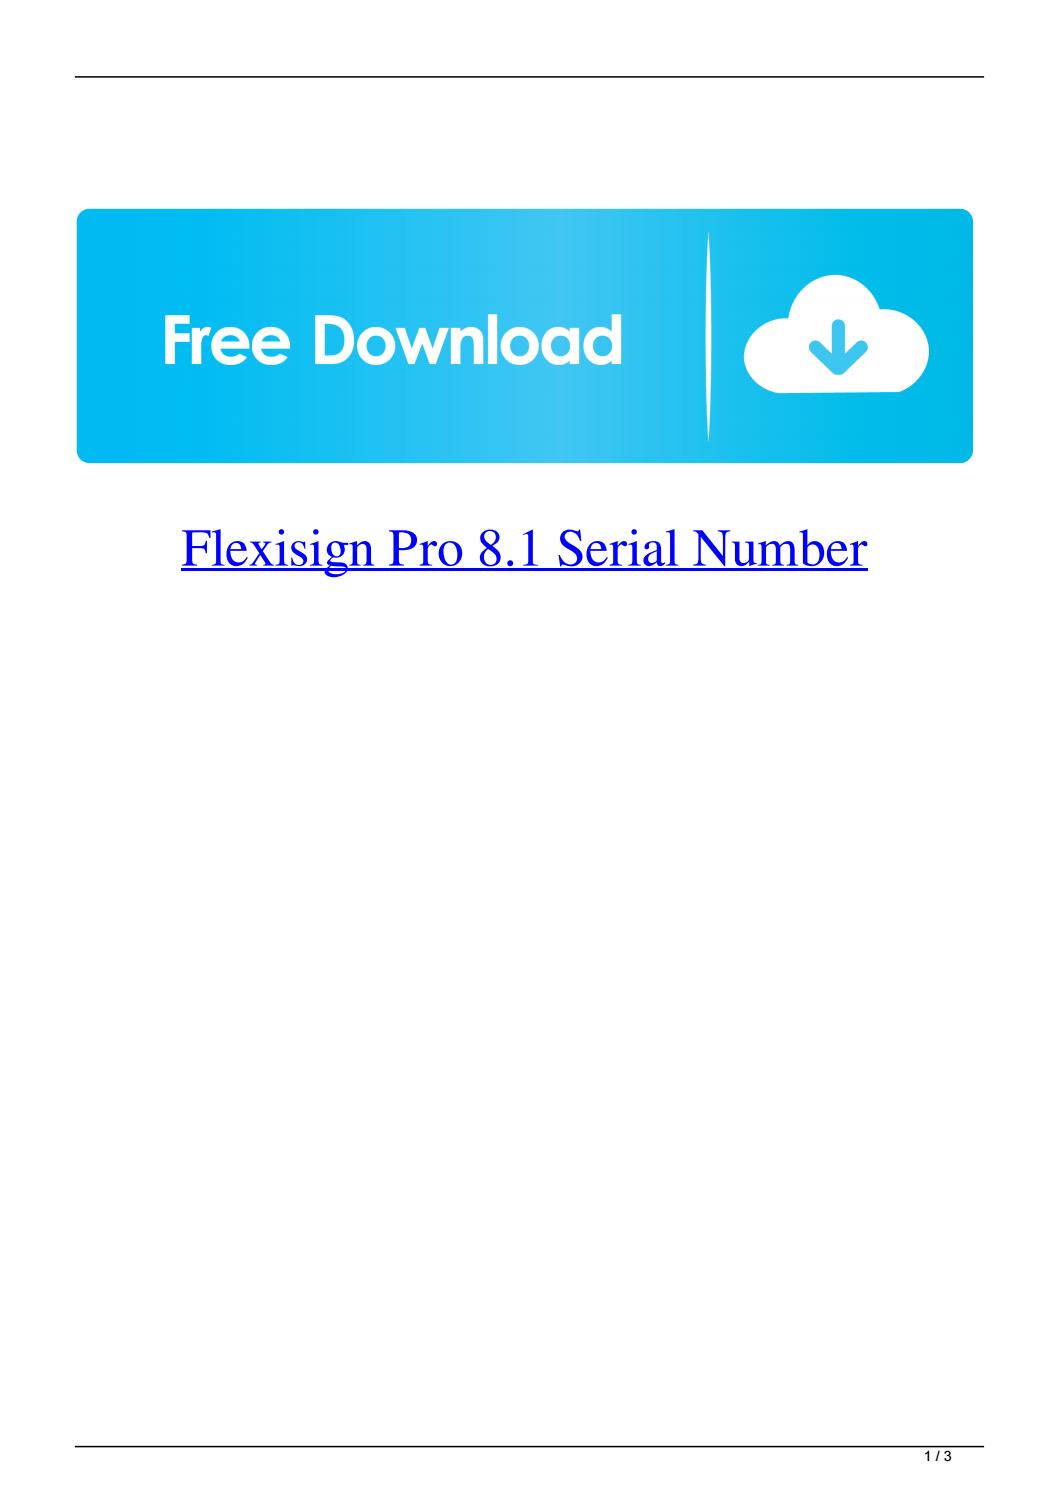 flexisign pro 8.1 free download with crack windows 7